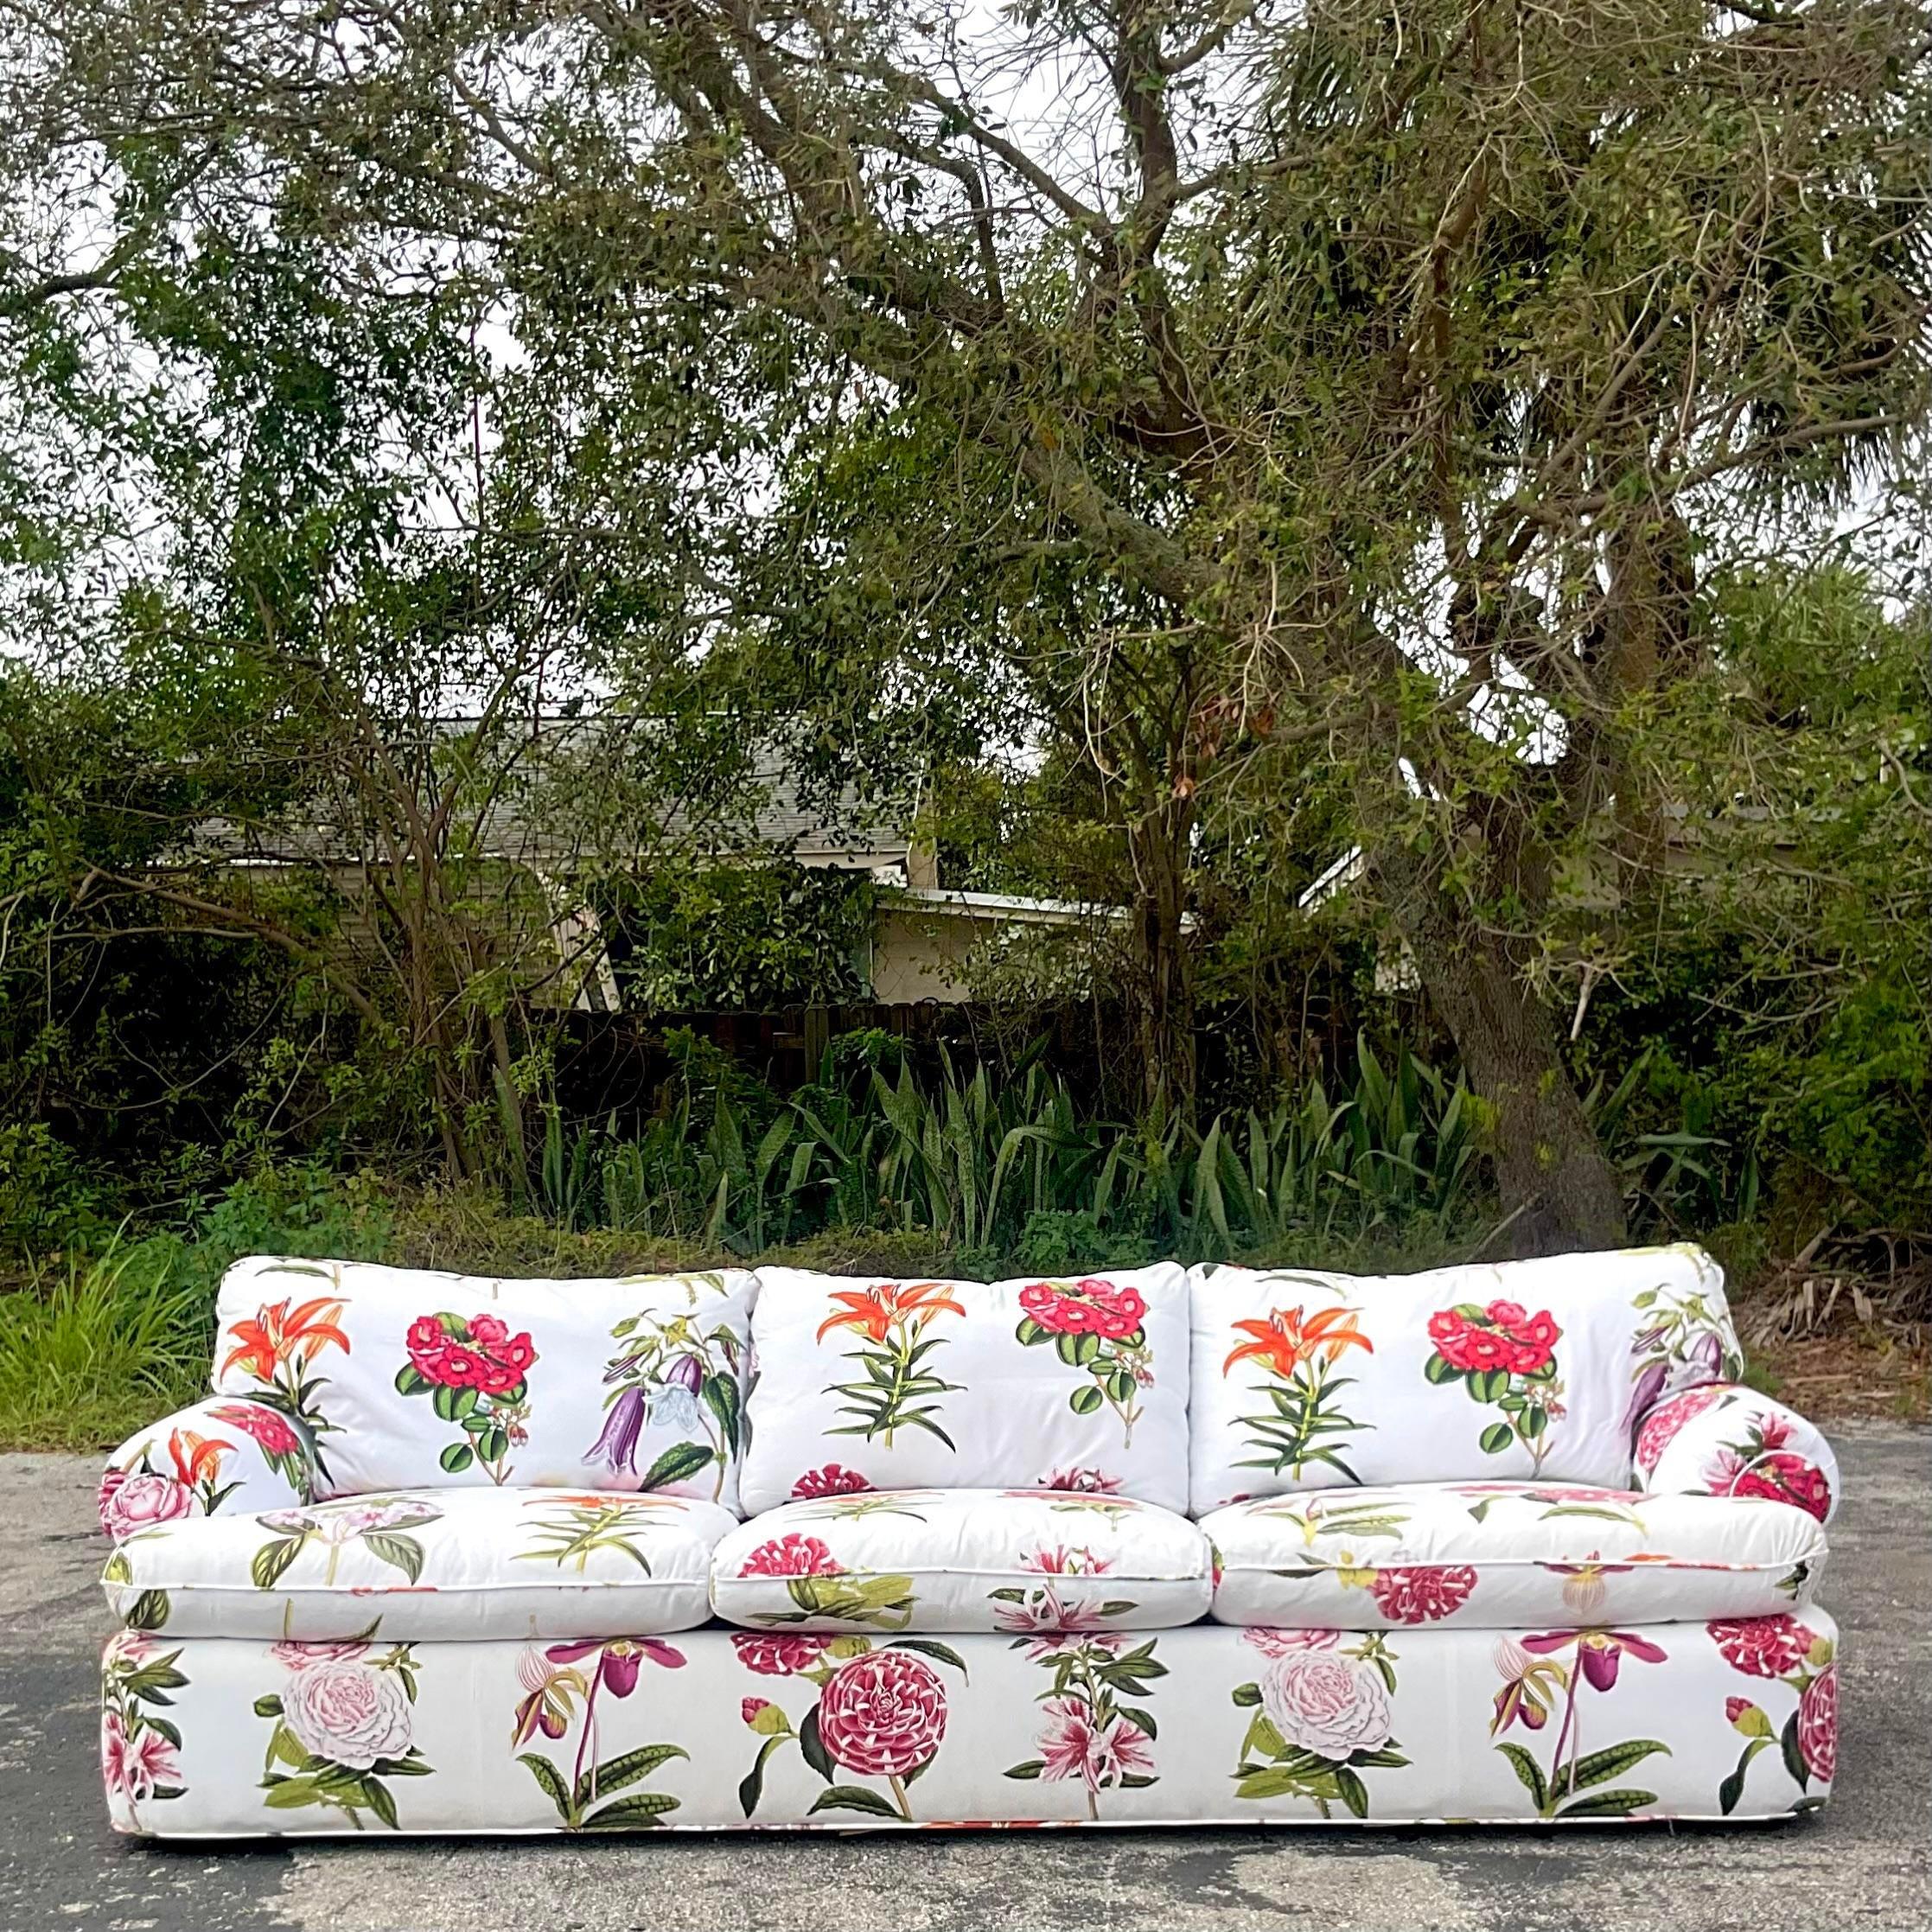 A stunning vintage Boho sofa. A brilliantly colored floral print on a pique weave cotton. Extra long for extra glamour. Coordinating pieces also available in the same print. 